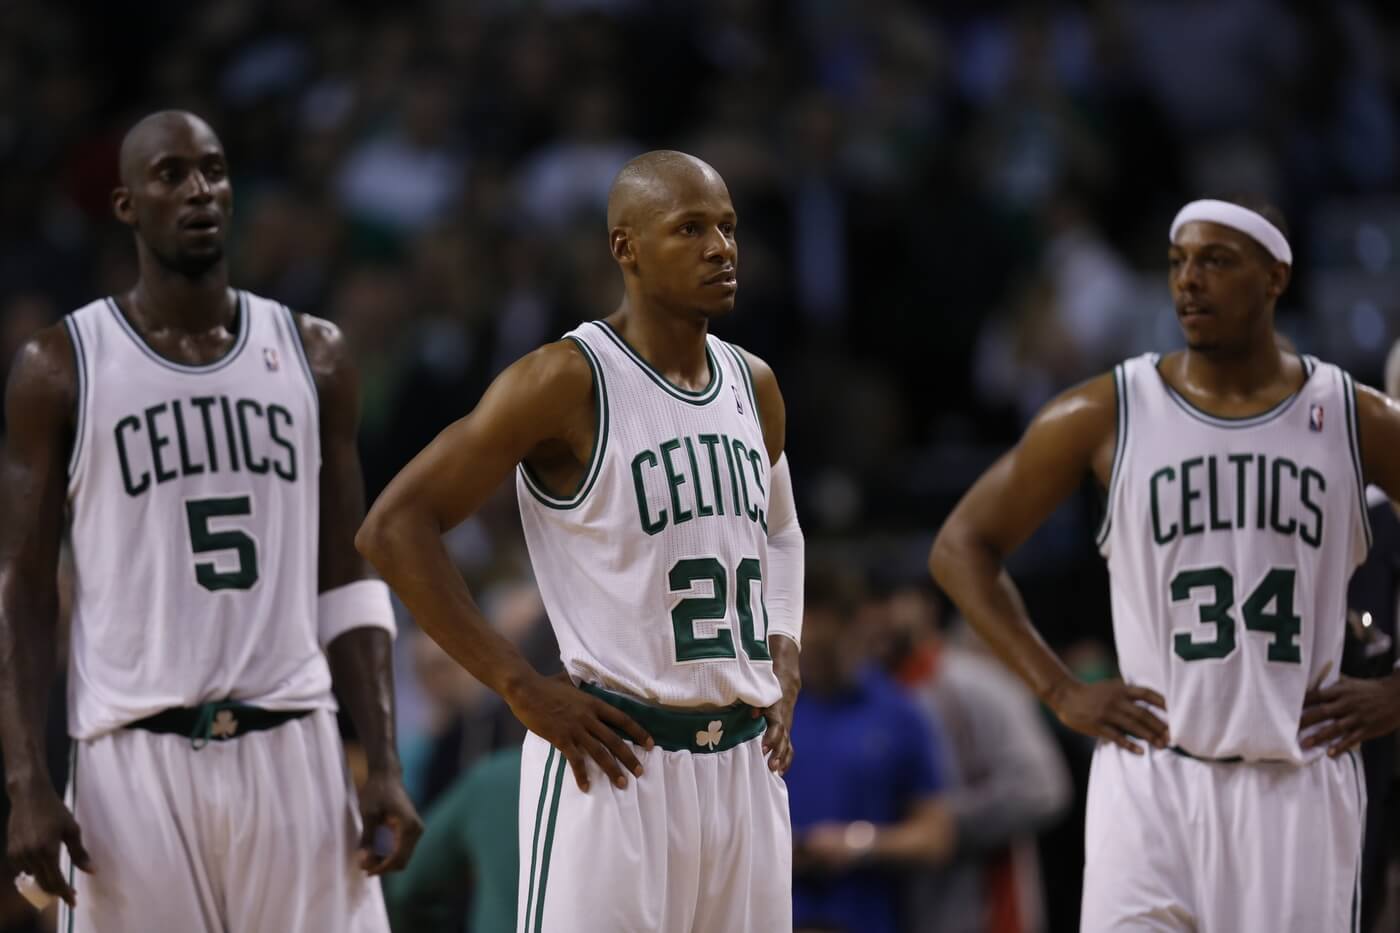 May 14, 2012; Boston, MA, USA; Boston Celtics shooting guard Ray Allen (20), small forward Paul Pierce (34) and power forward Kevin Garnett (5) react as they take on the Philadelphia 76ers during the fourth quarter in game two of the Eastern Conference semifinals of the 2012 NBA Playoffs at TD Garden. The Philadelphia 76ers defeated the Boston Celtics 82-81.